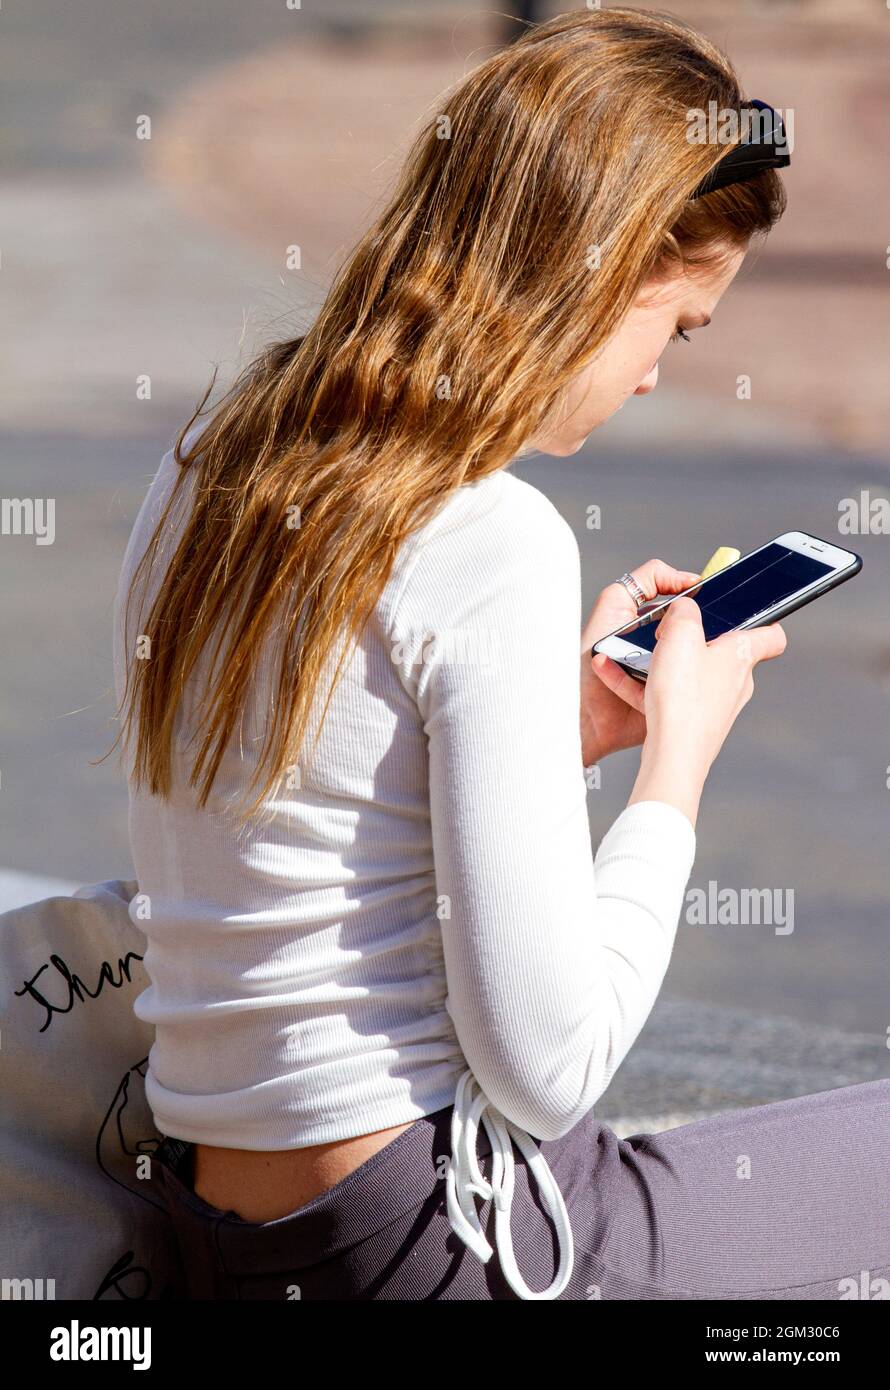 Dundee, Tayside, Scotland, UK. 16th Sep, 2021. UK weather: Warm mid September sunshine across North East Scotland with temperatures reaching 19°C. A glamorous young Polish woman spending the day out enjoying the glorious warm sunny weather whilst texting messages on her mobile phone in Dundee city centre. Credit: Dundee Photographics/Alamy Live News Stock Photo